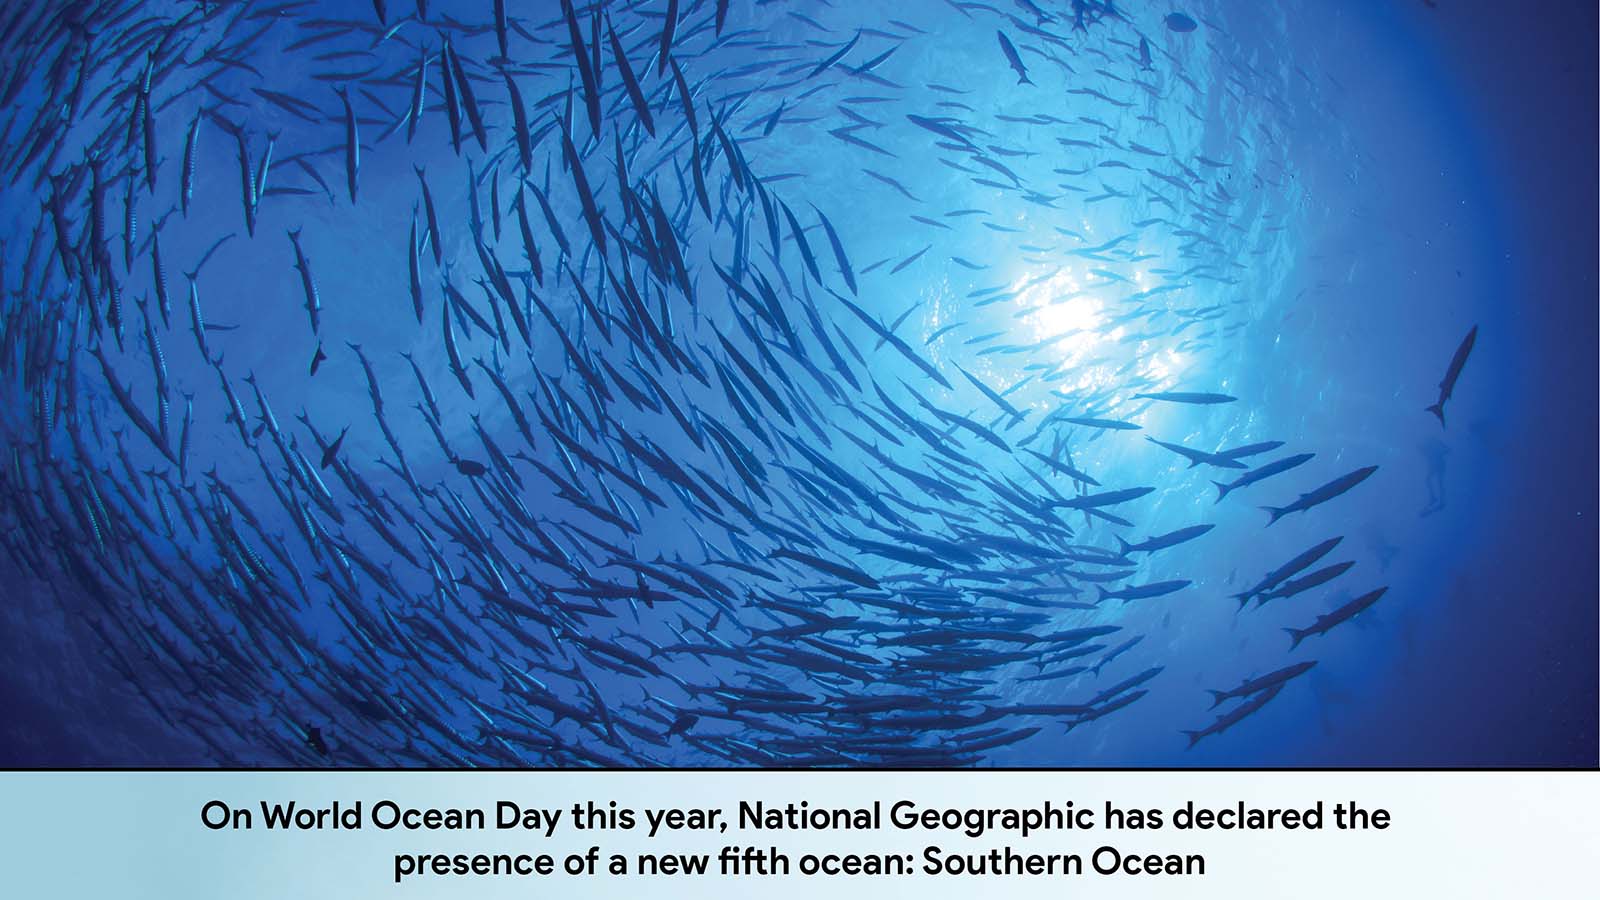 National Geographic has declared the presence of a new fifth ocean: Southern Ocean